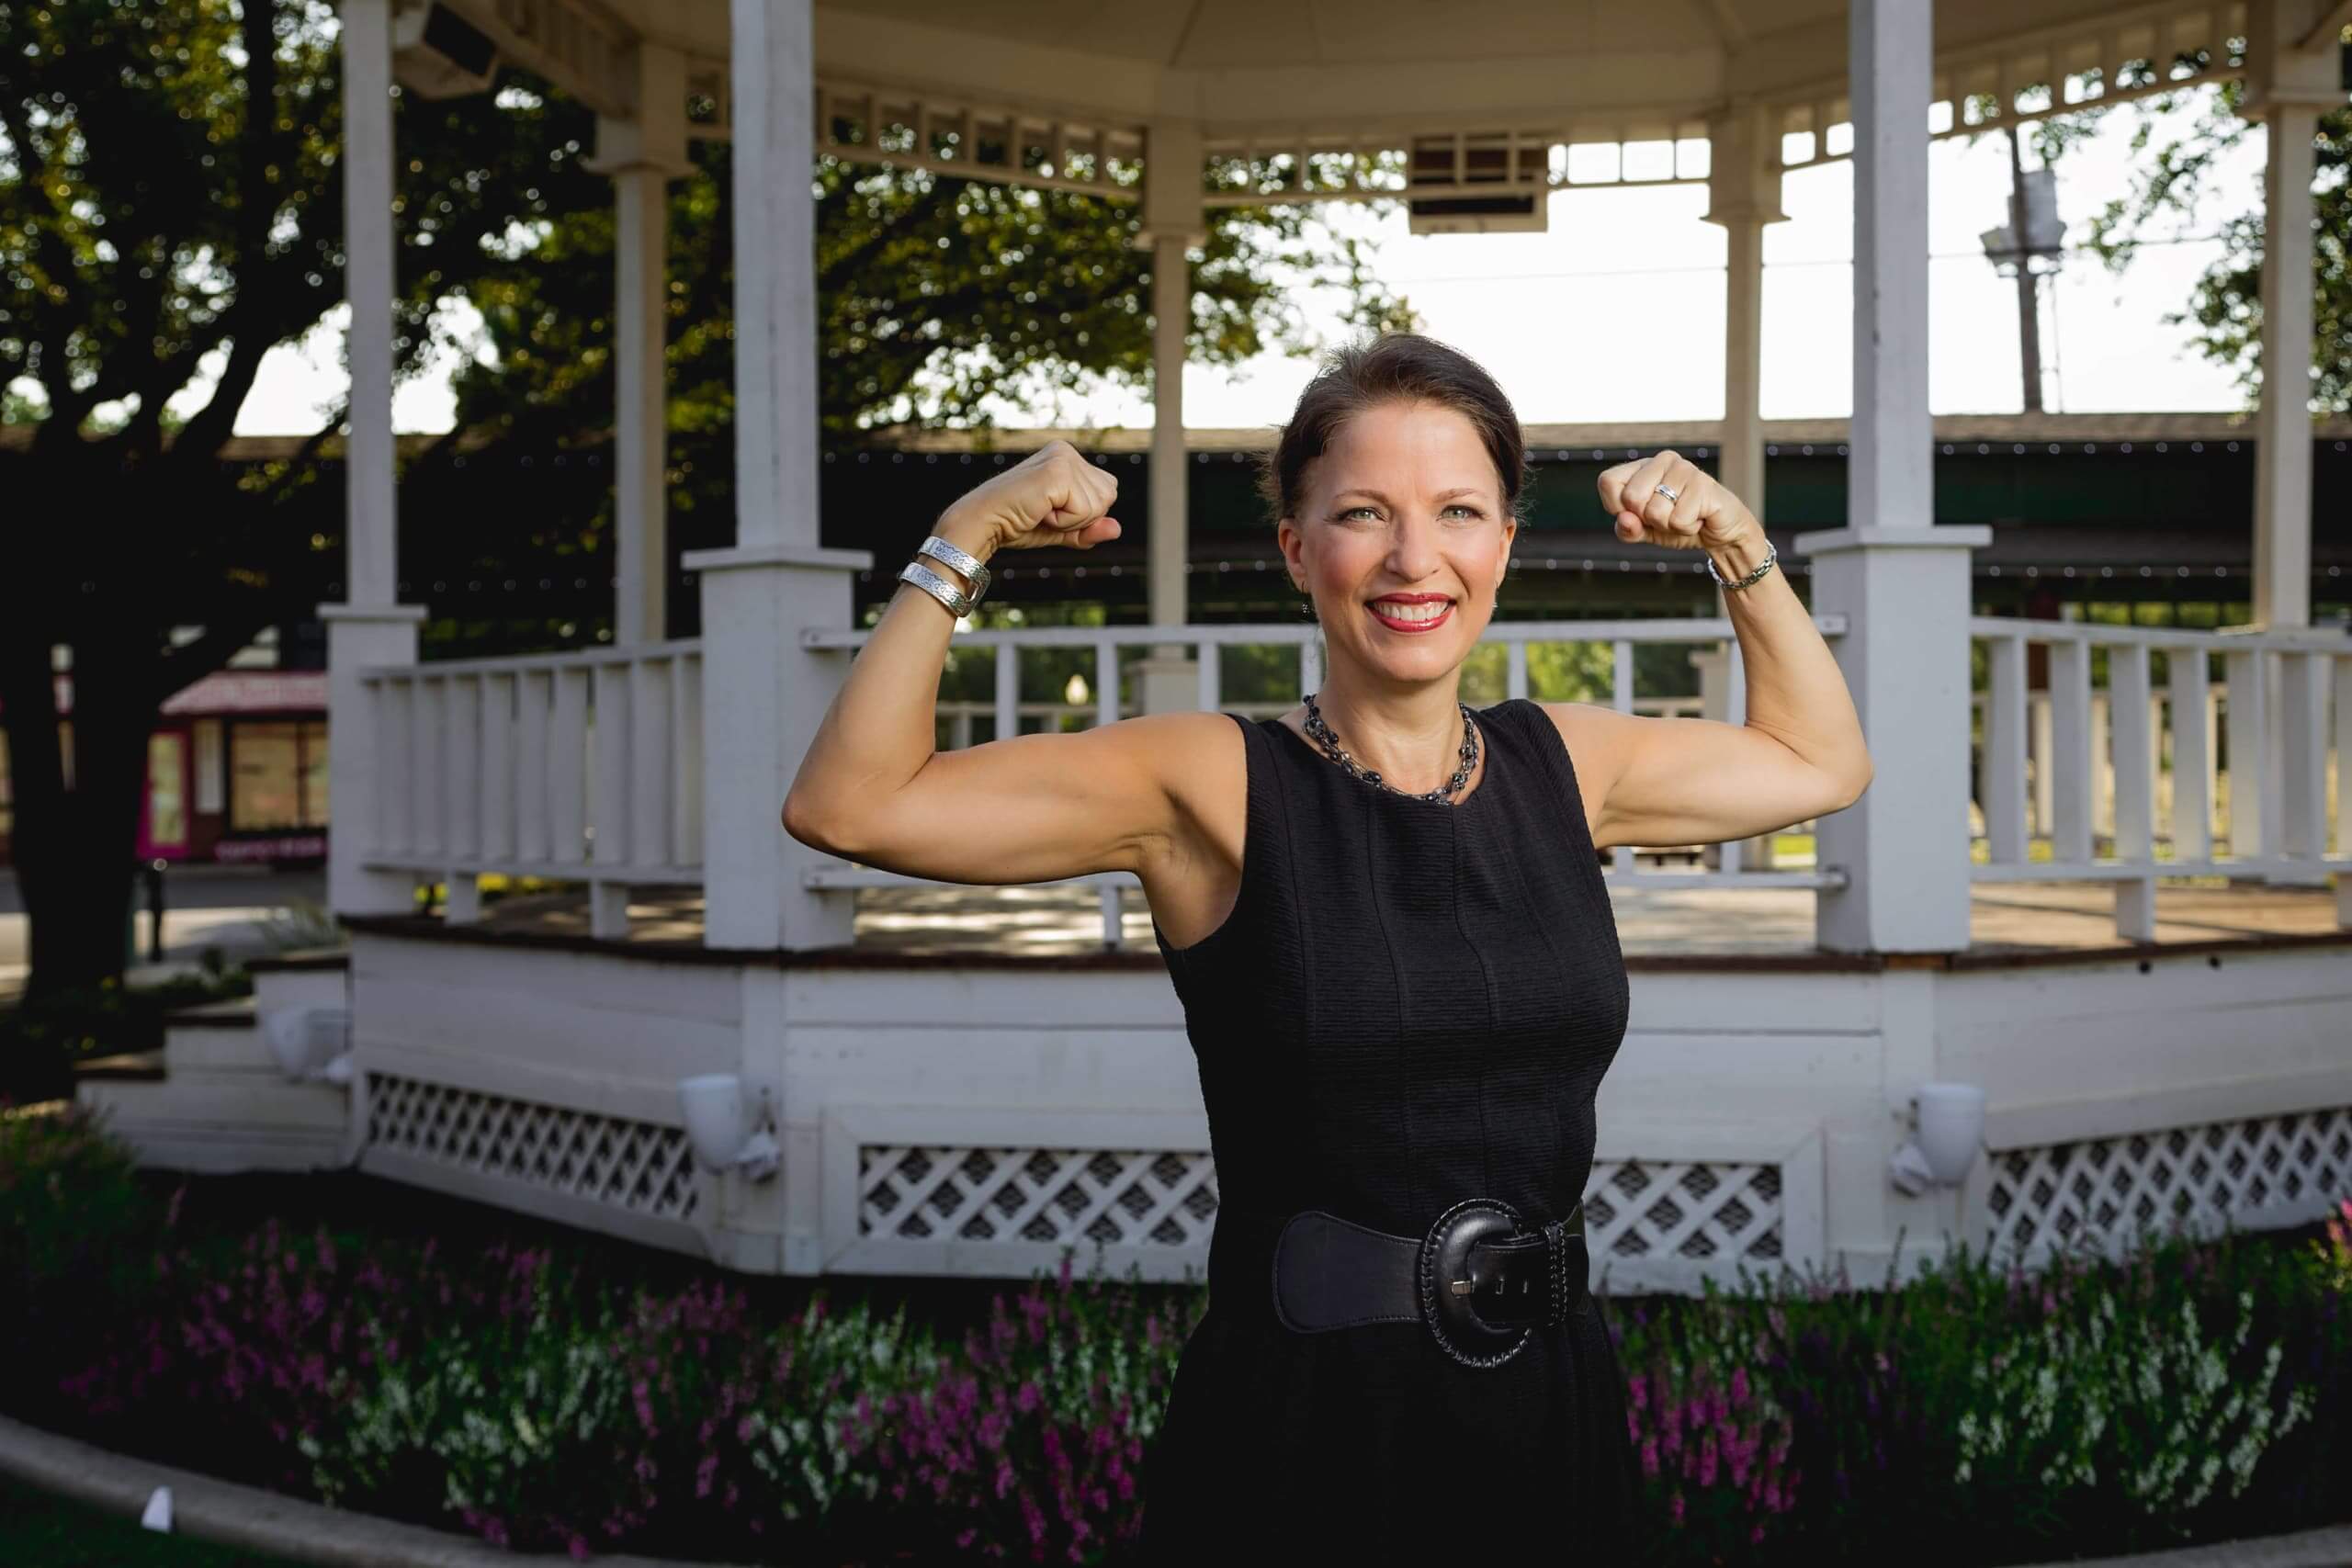 Janet St. James showing her strength as a breast cancer survivor